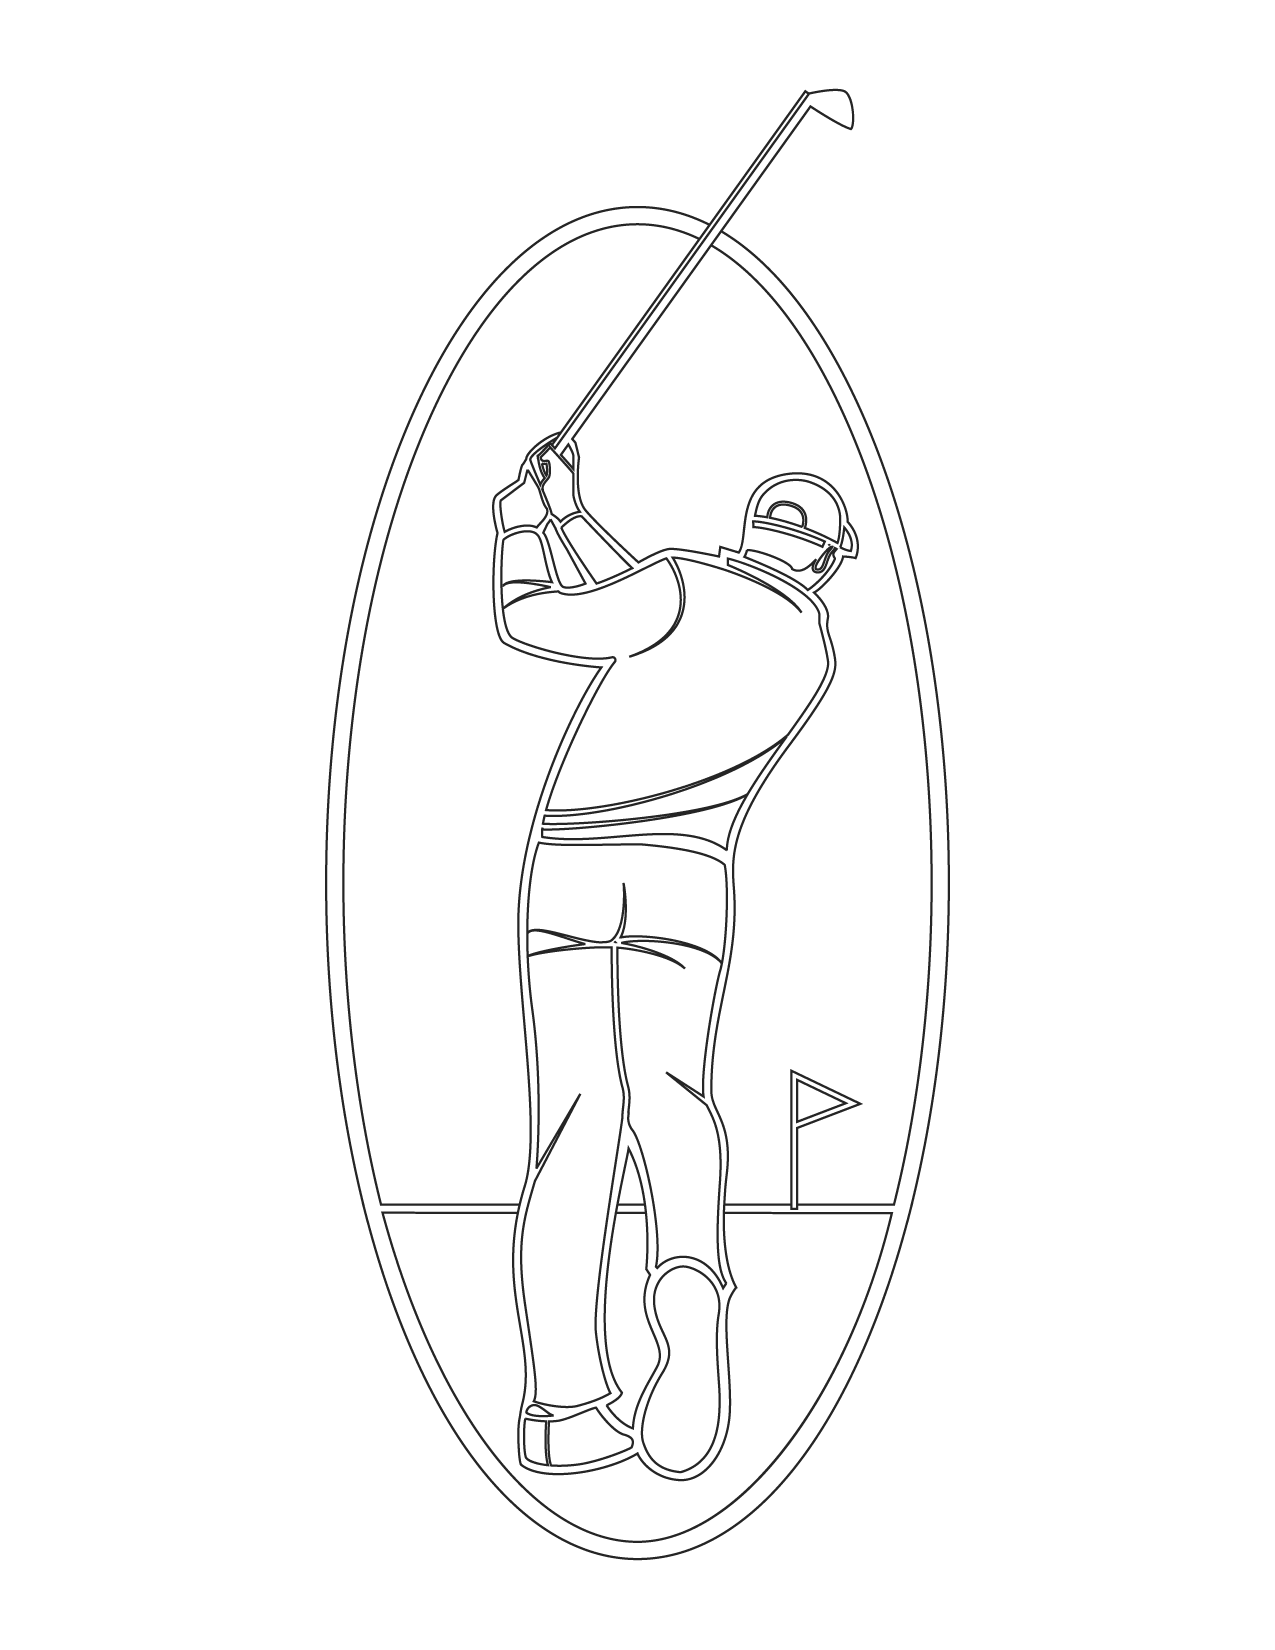 Golf Coloring Page